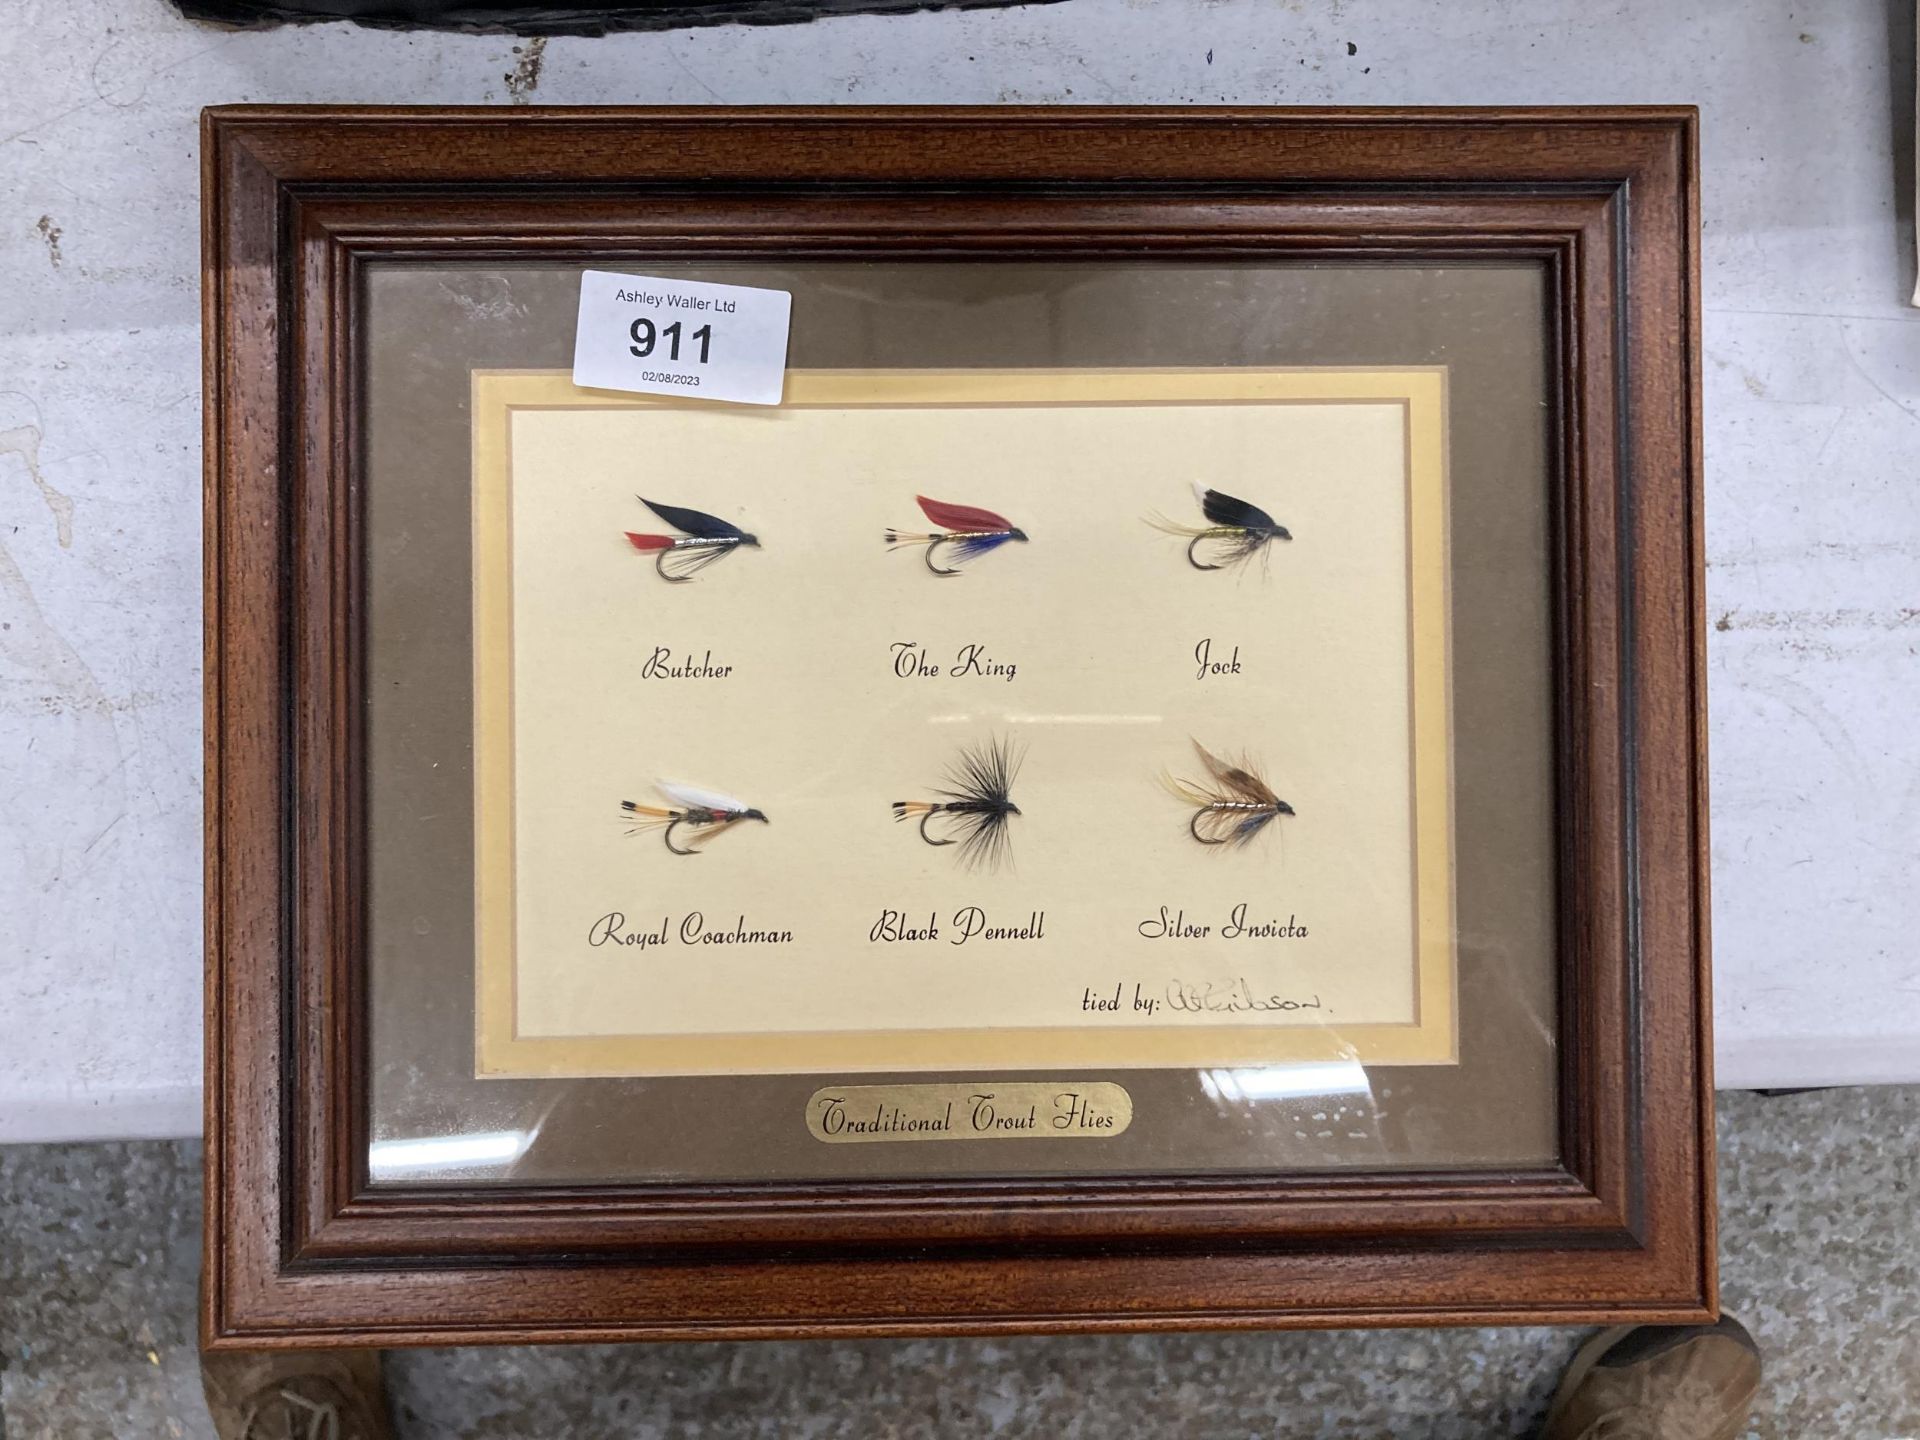 A FRAMED TRADITIONAL TROUT FLIES FISHING MONTAGE PICTURE